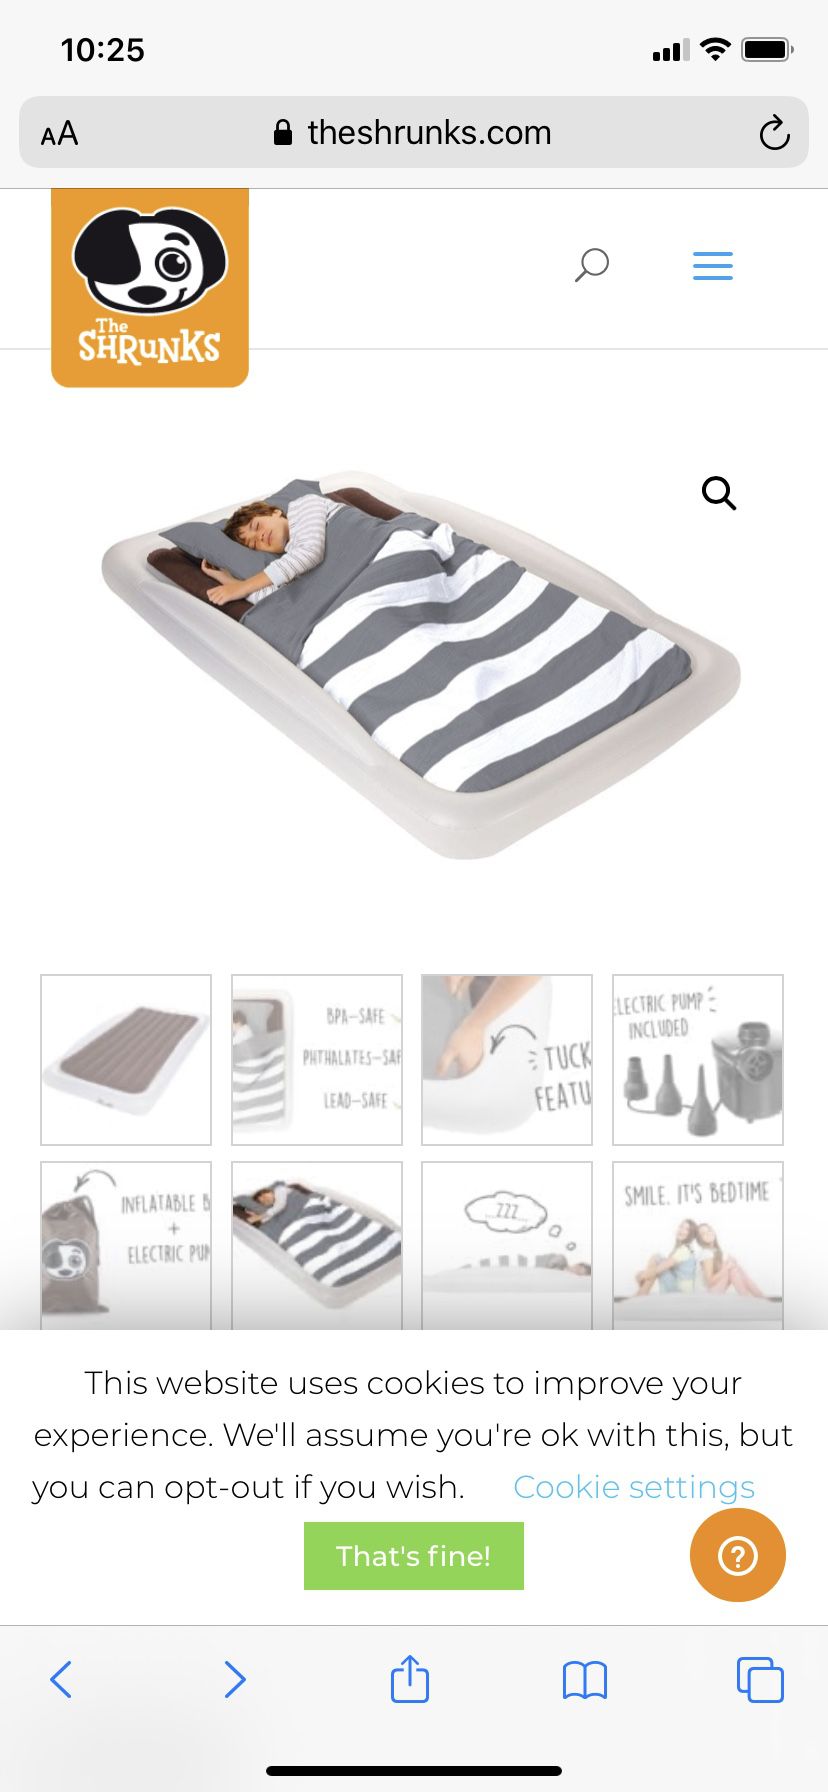 Shrinks Toddler air mattress with bumpers.